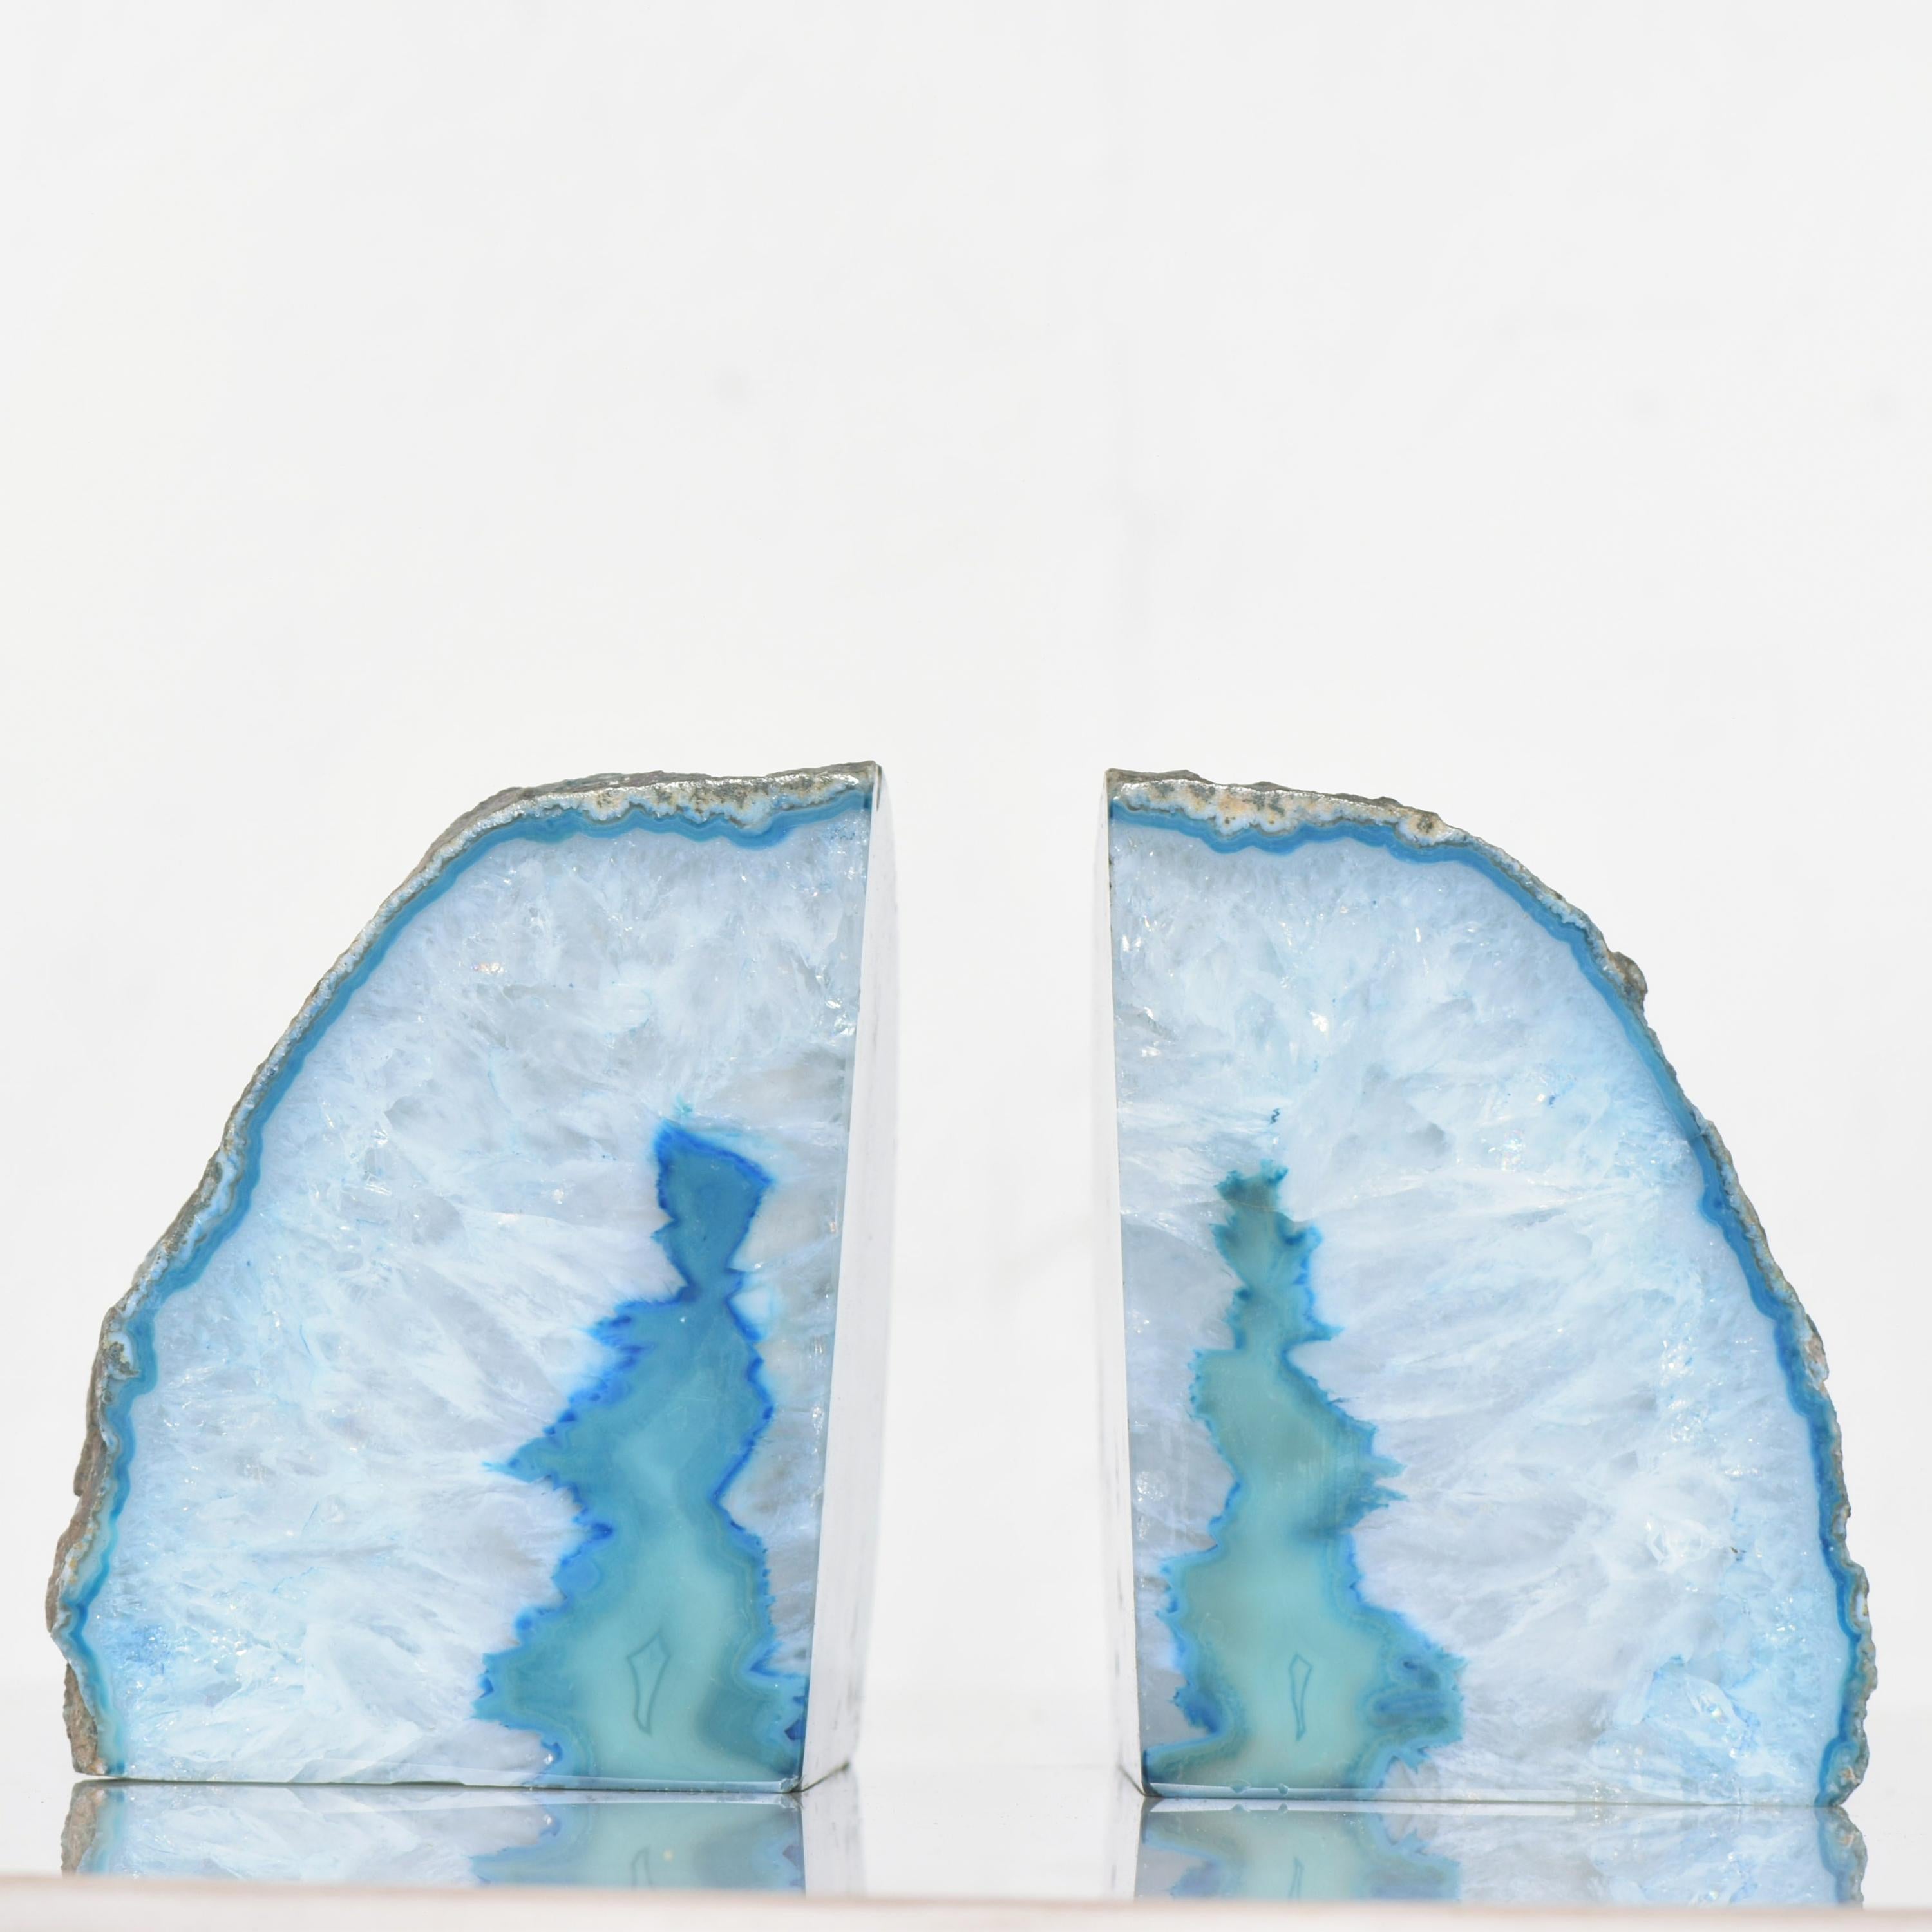 Midcentury pair of organic modern bookends in polished floating sea of blue quartz stone 
Breathtakingly beautiful, circa 1970s
Measures: 4 1/2